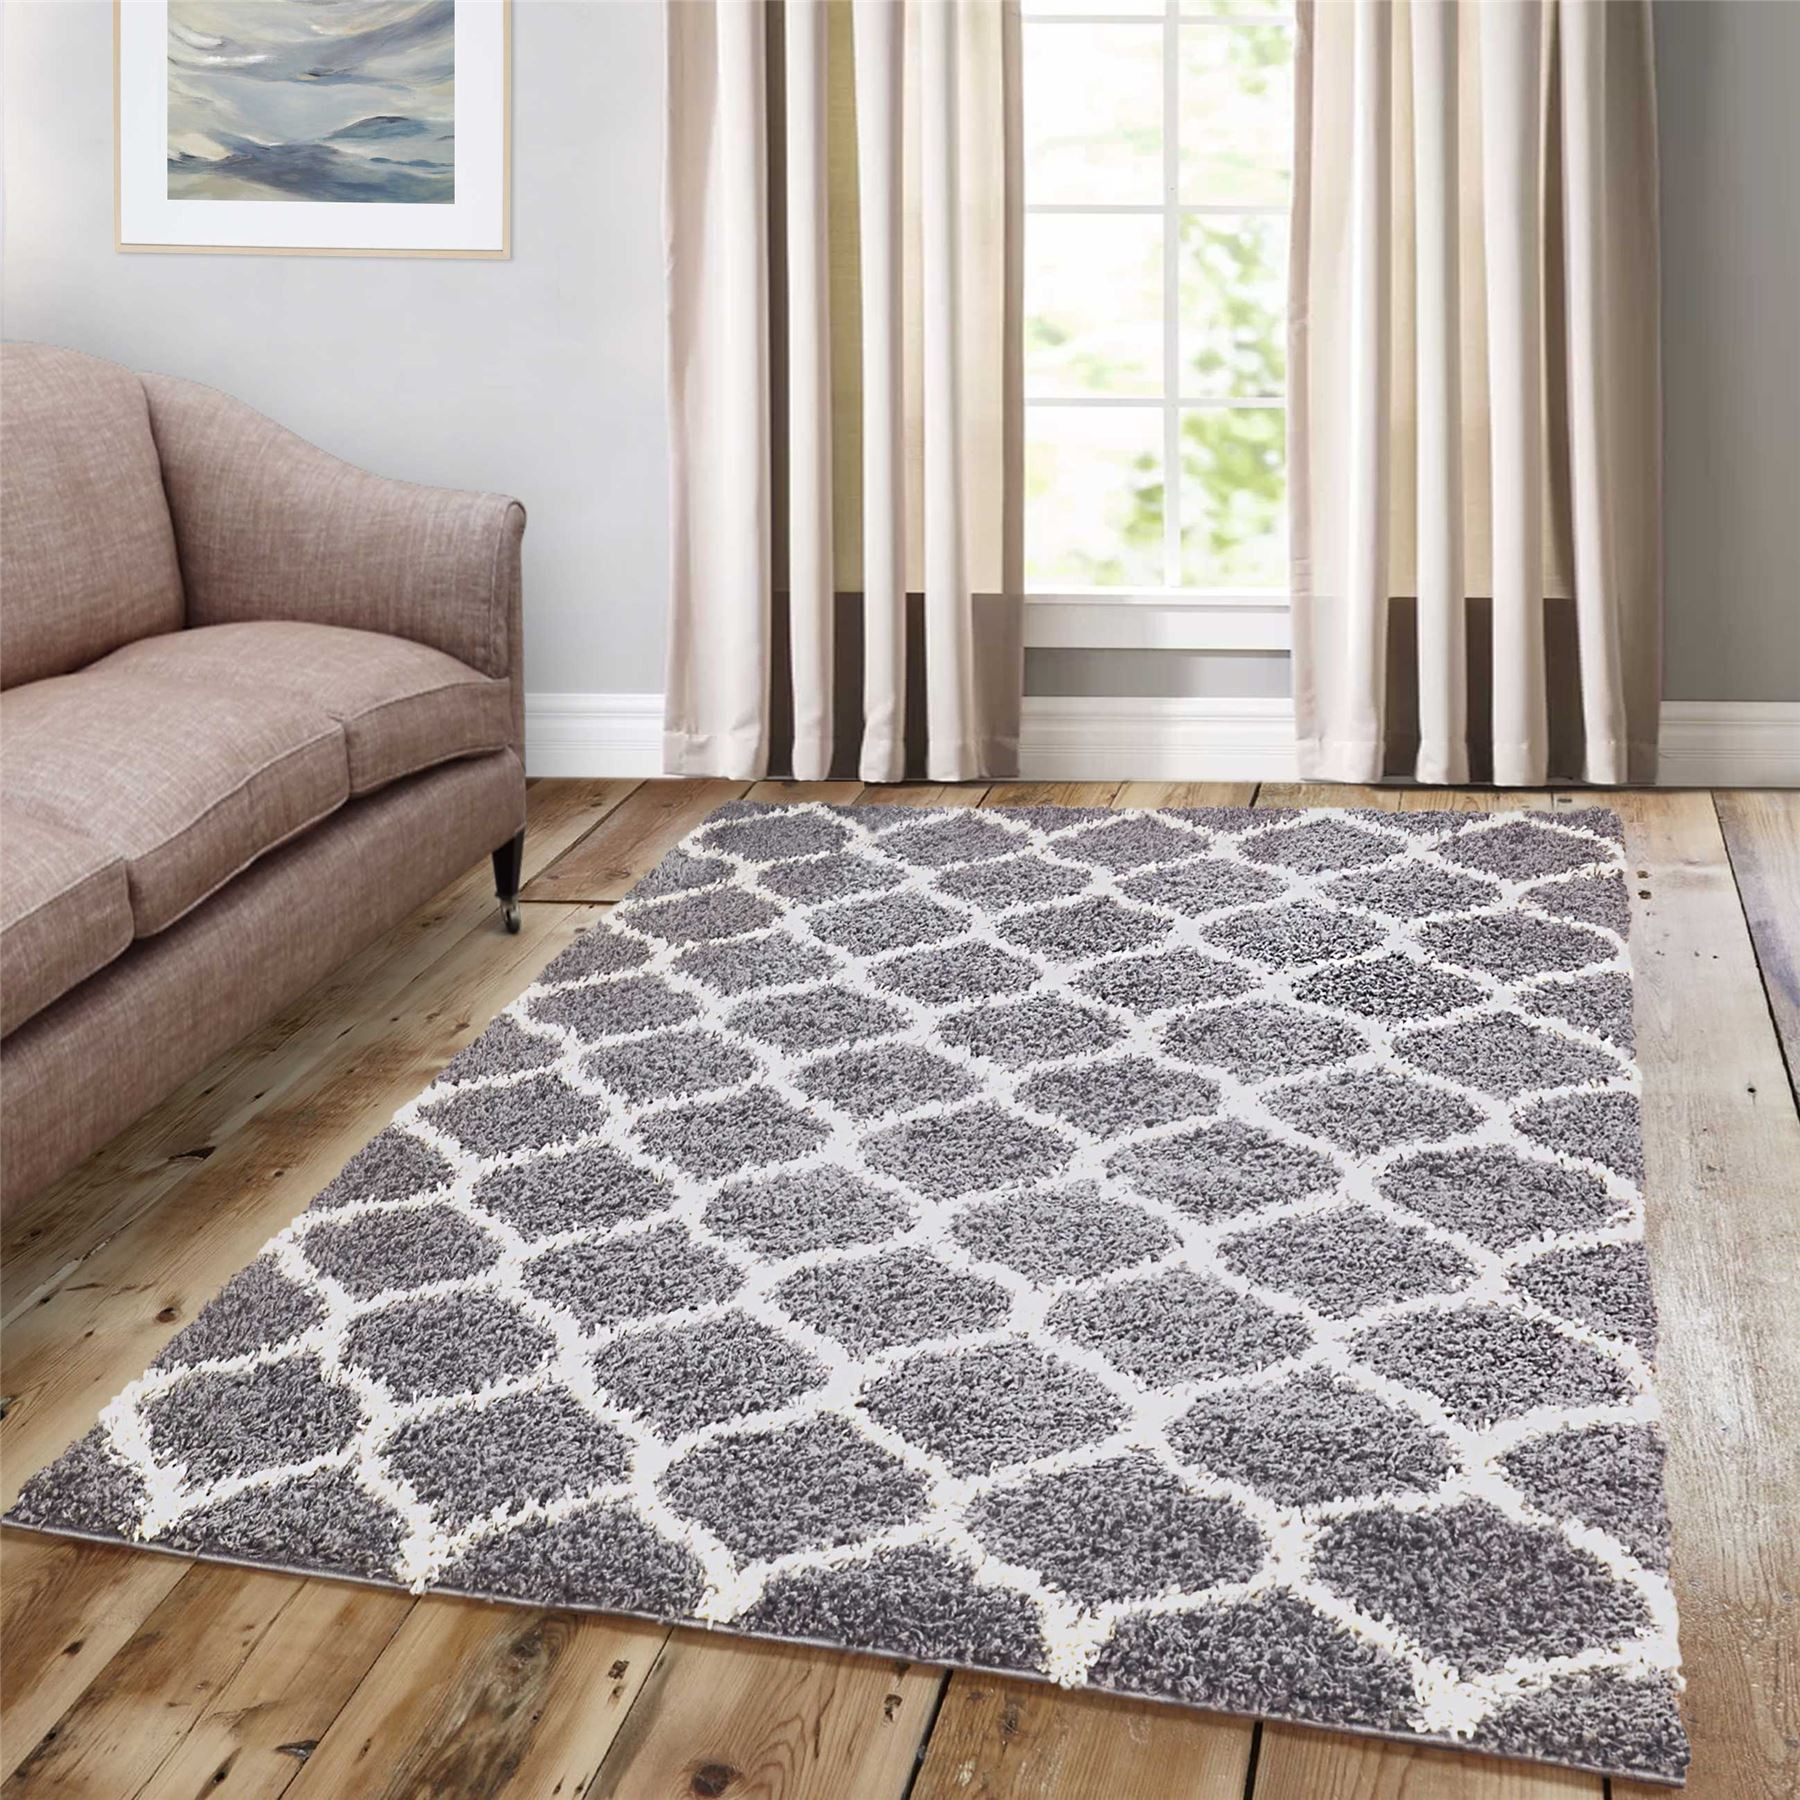 Shaggy Living Room Rugs
 Thick Geometric Shag Rugs Assorted Colours Luxury